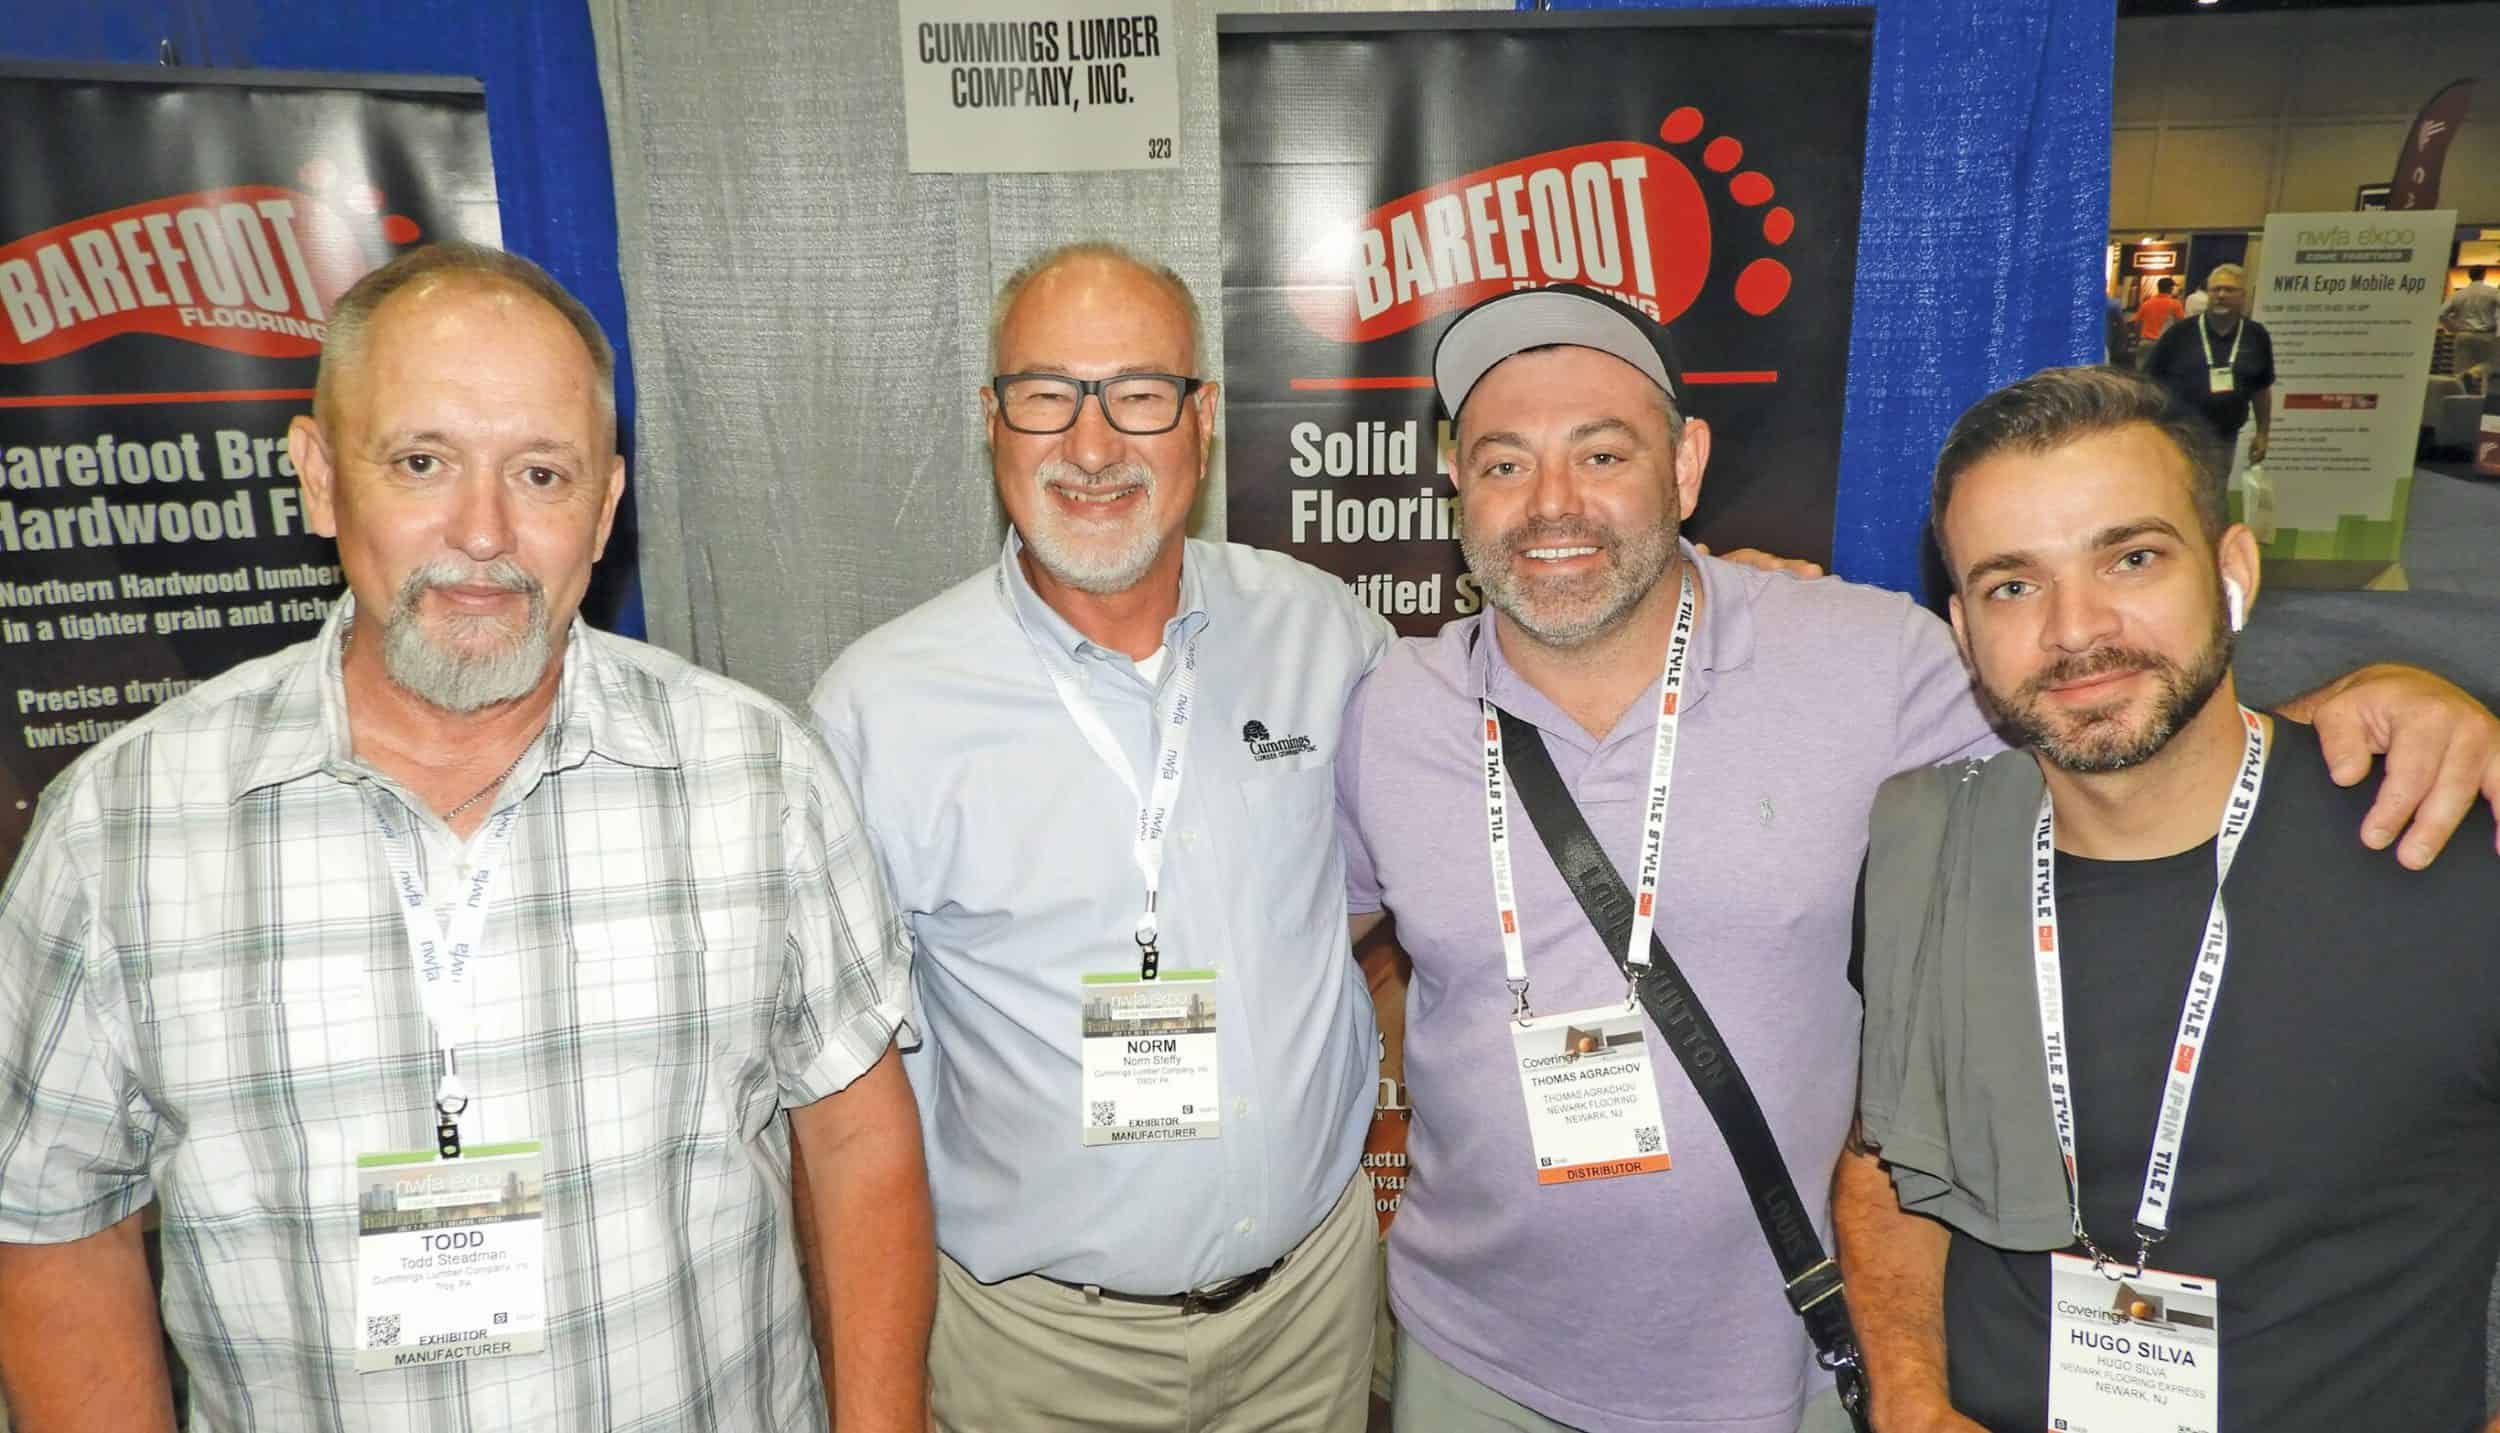 NWFA Hosts Successful Wood Flooring Expo | Miller Wood Trade Publications